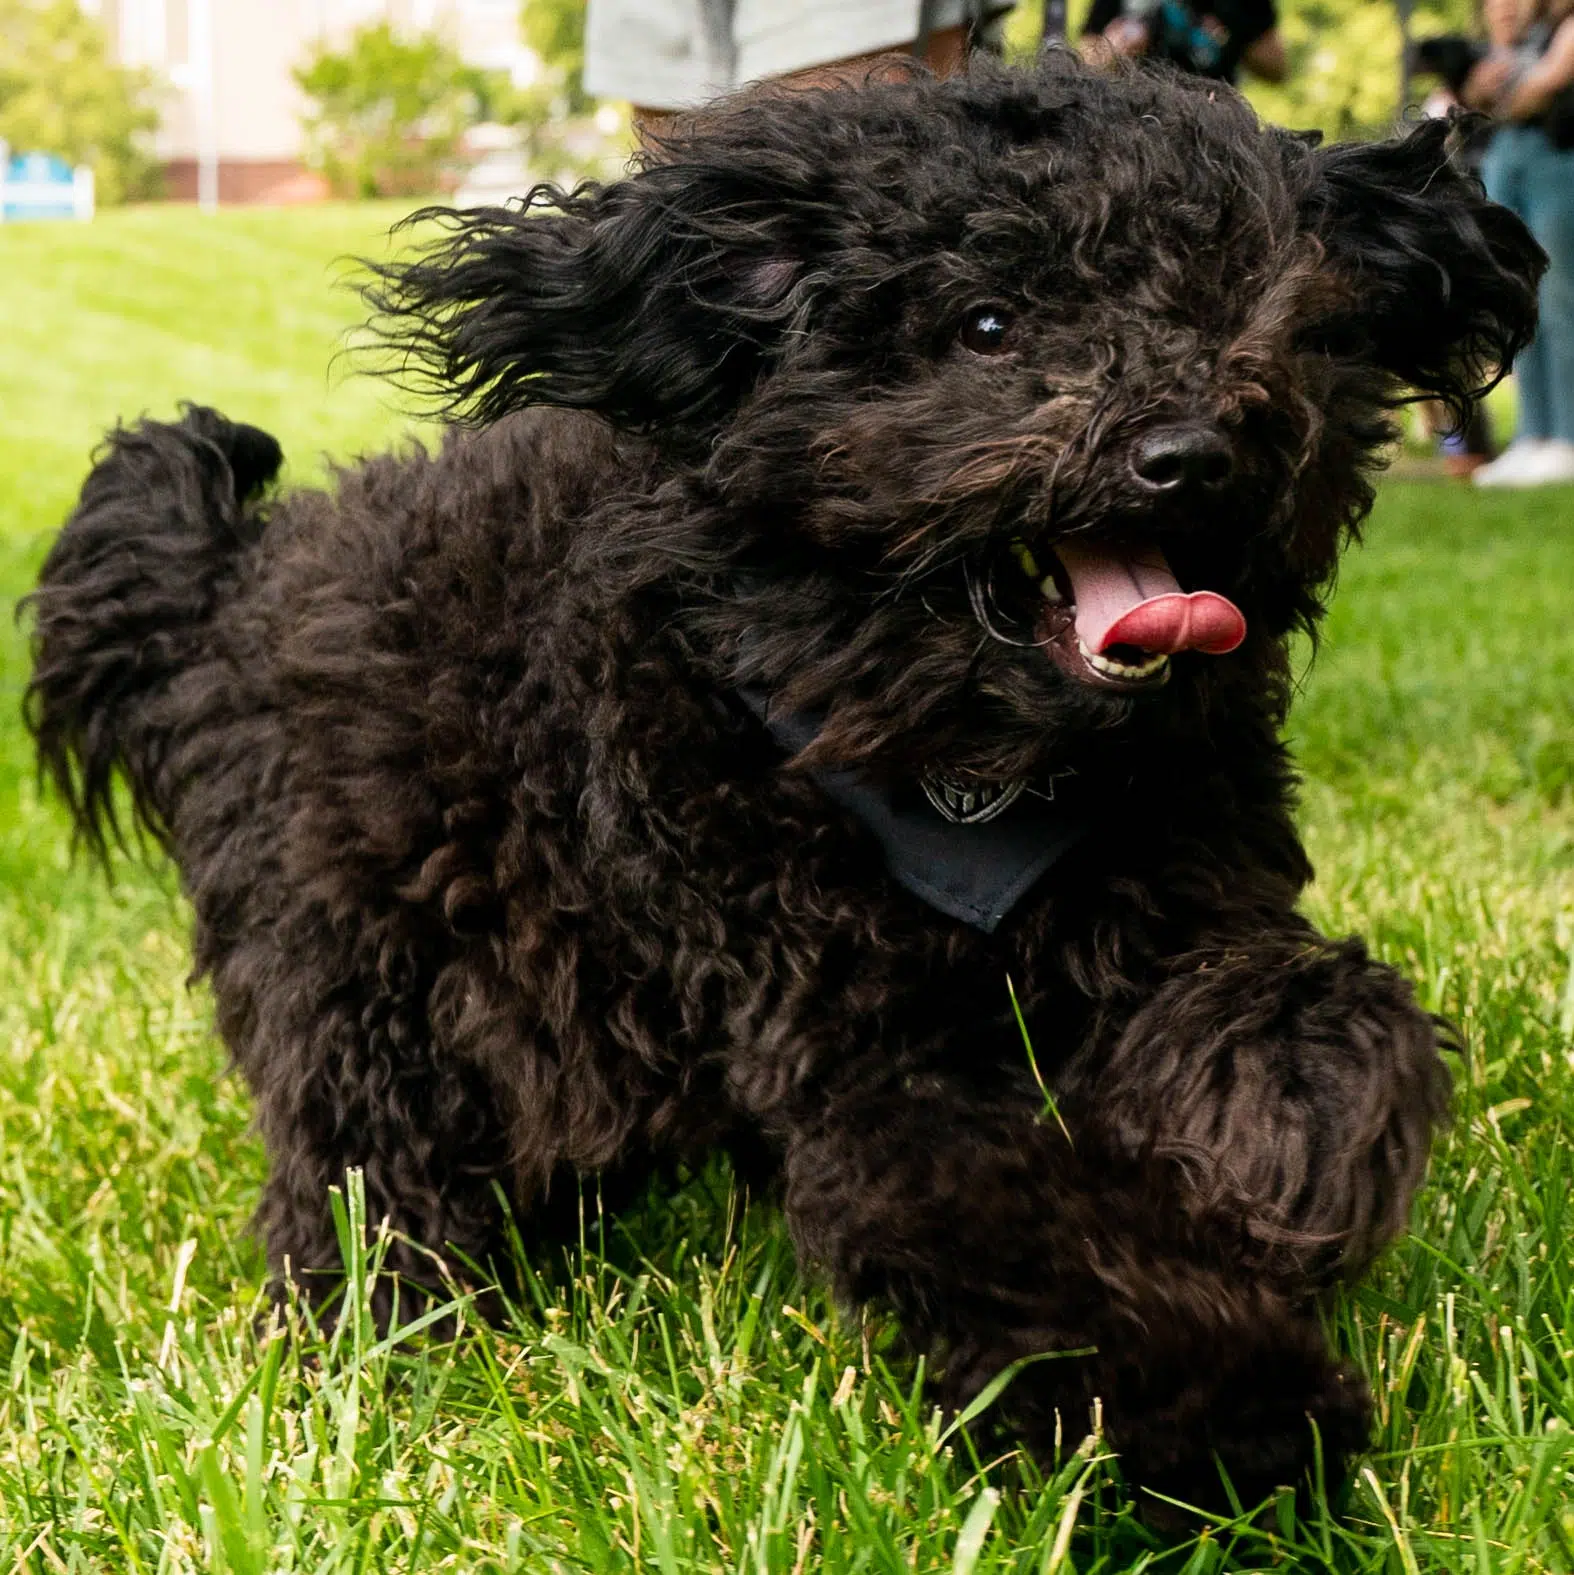 A small, fluffy, black dog frolics in green grass with his mouth open and tongue sticking out.